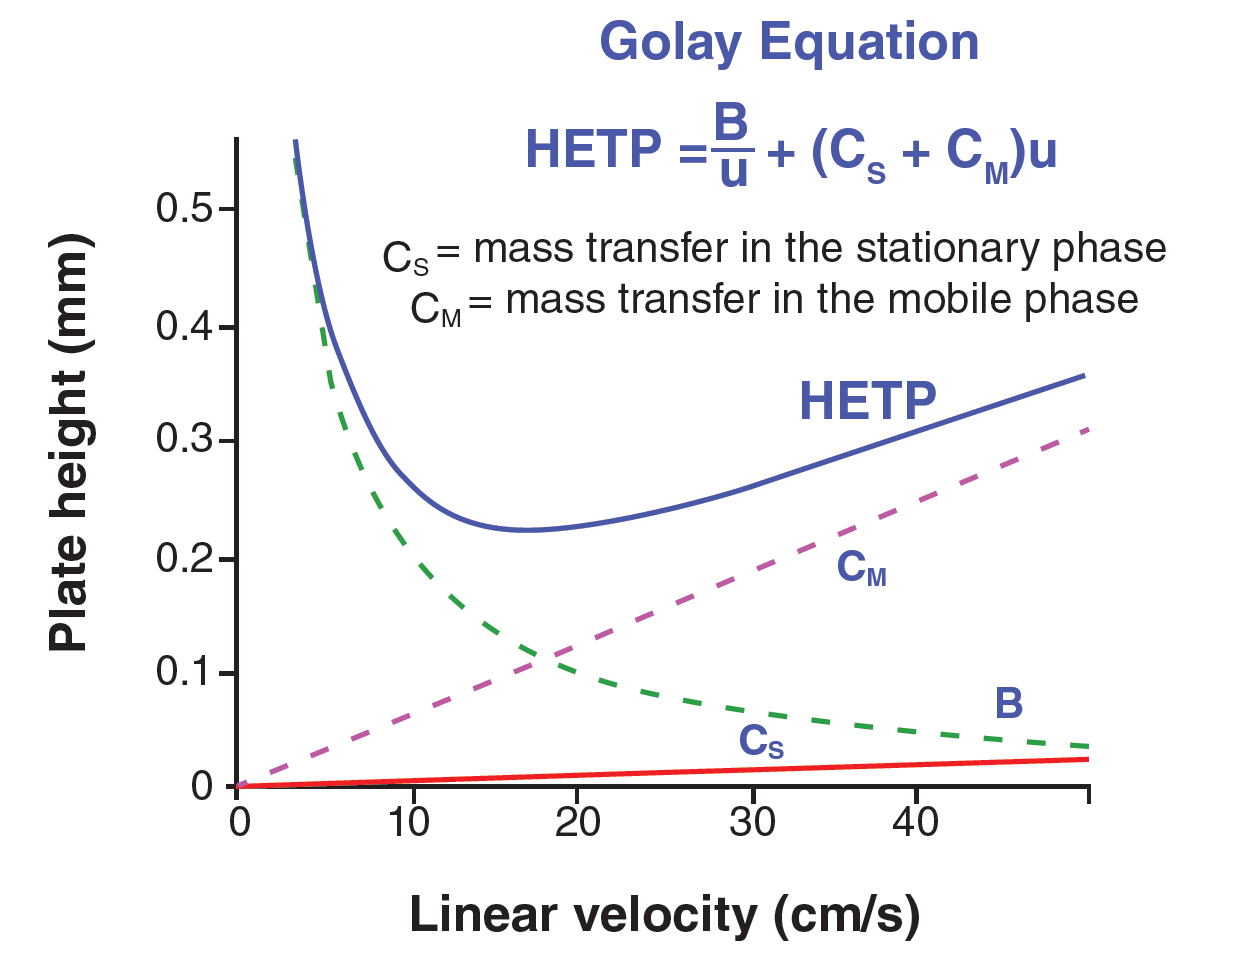 Is Golay’s Famous Equation for HETP Still Relevant in Capillary GC? Part 2: Assumptions and Consequences